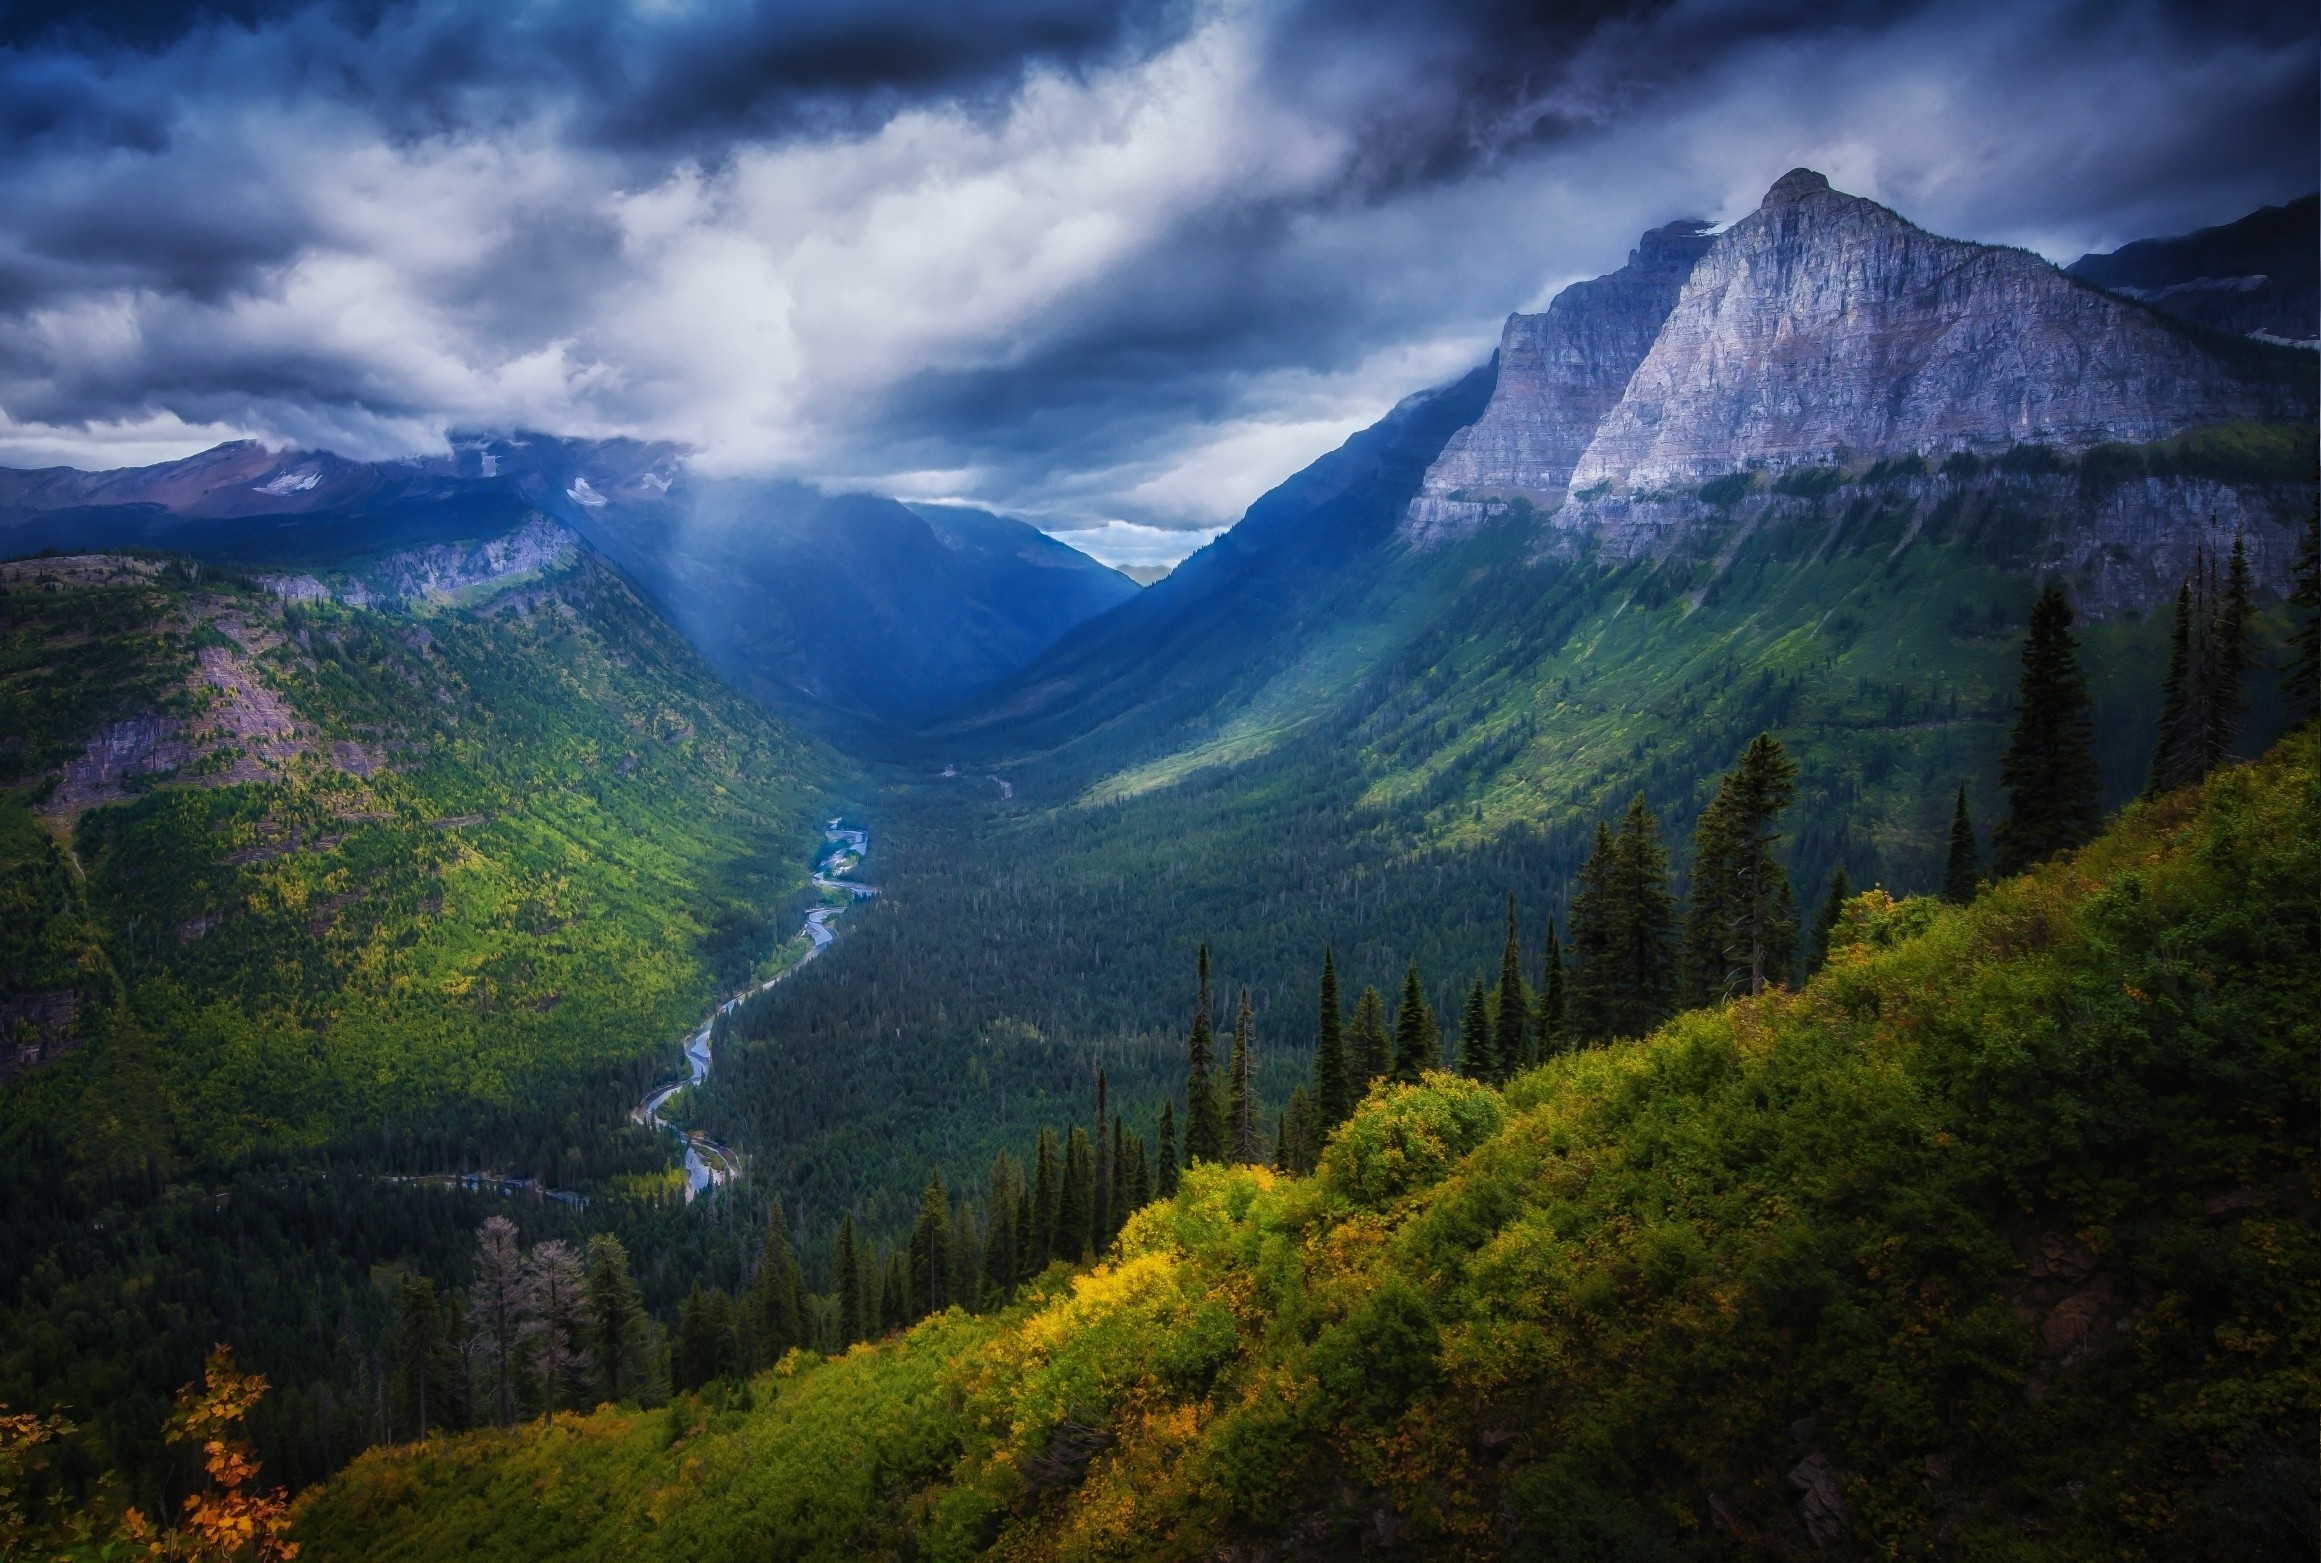 valley, Mountain, Forest, River, Cliff, Shrubs, Clouds, Summer, Nature